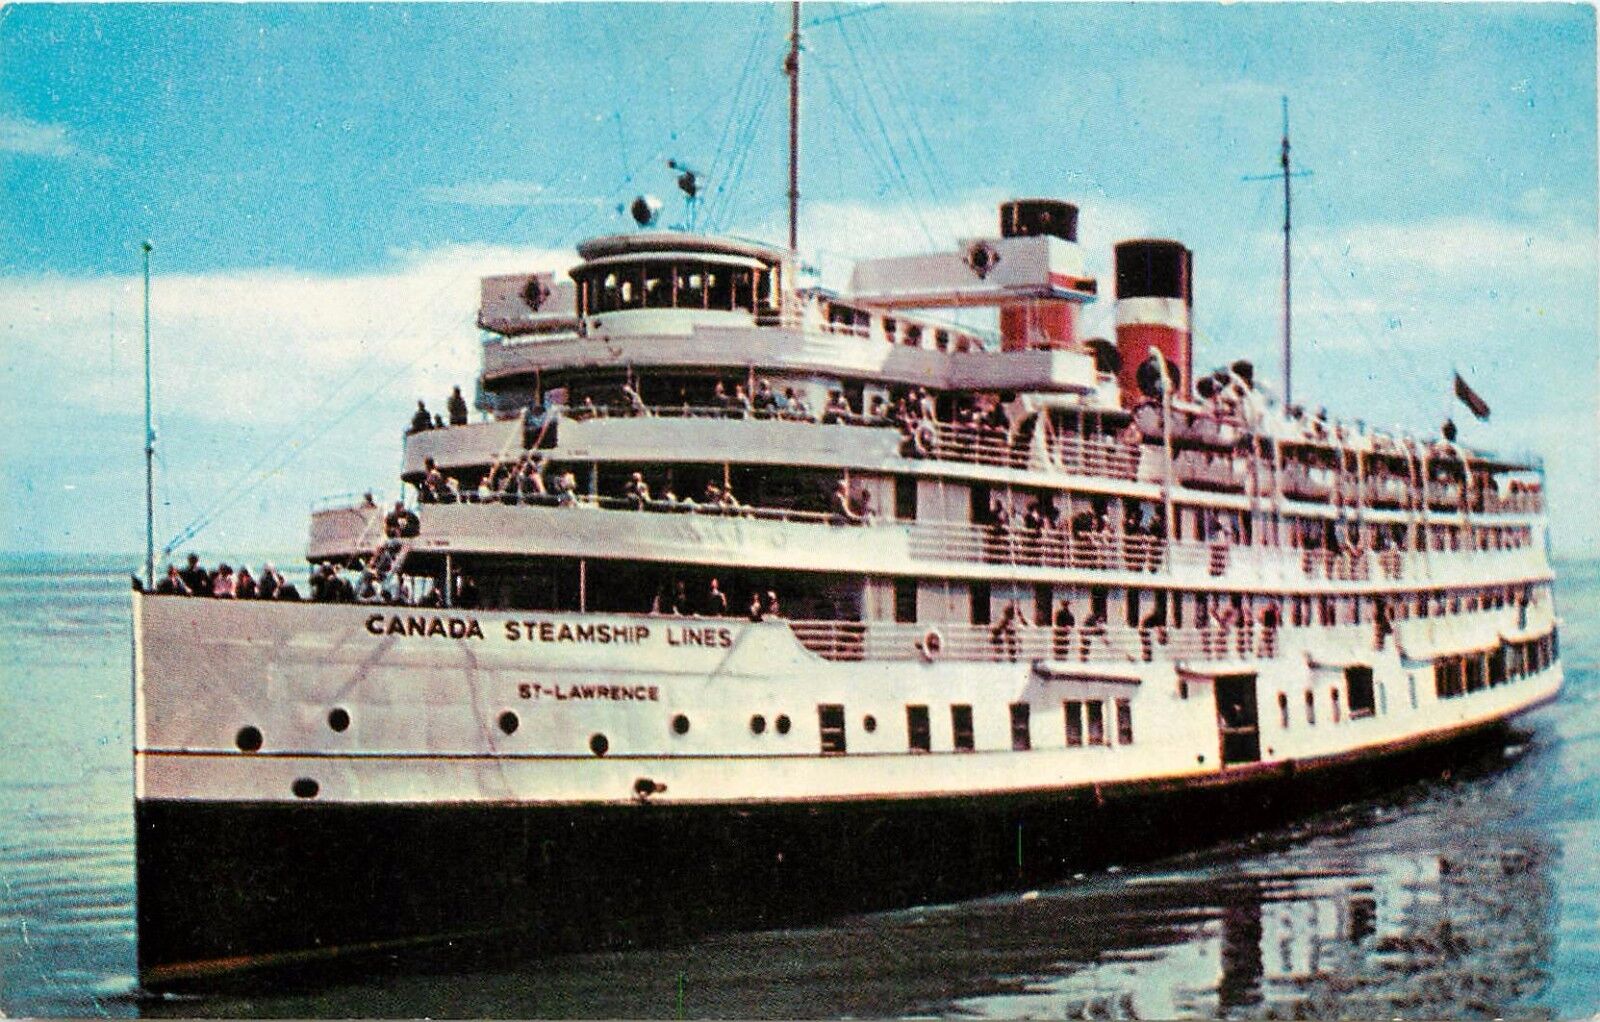 Canada Steam Ship Lines St. Lawrence Postcard